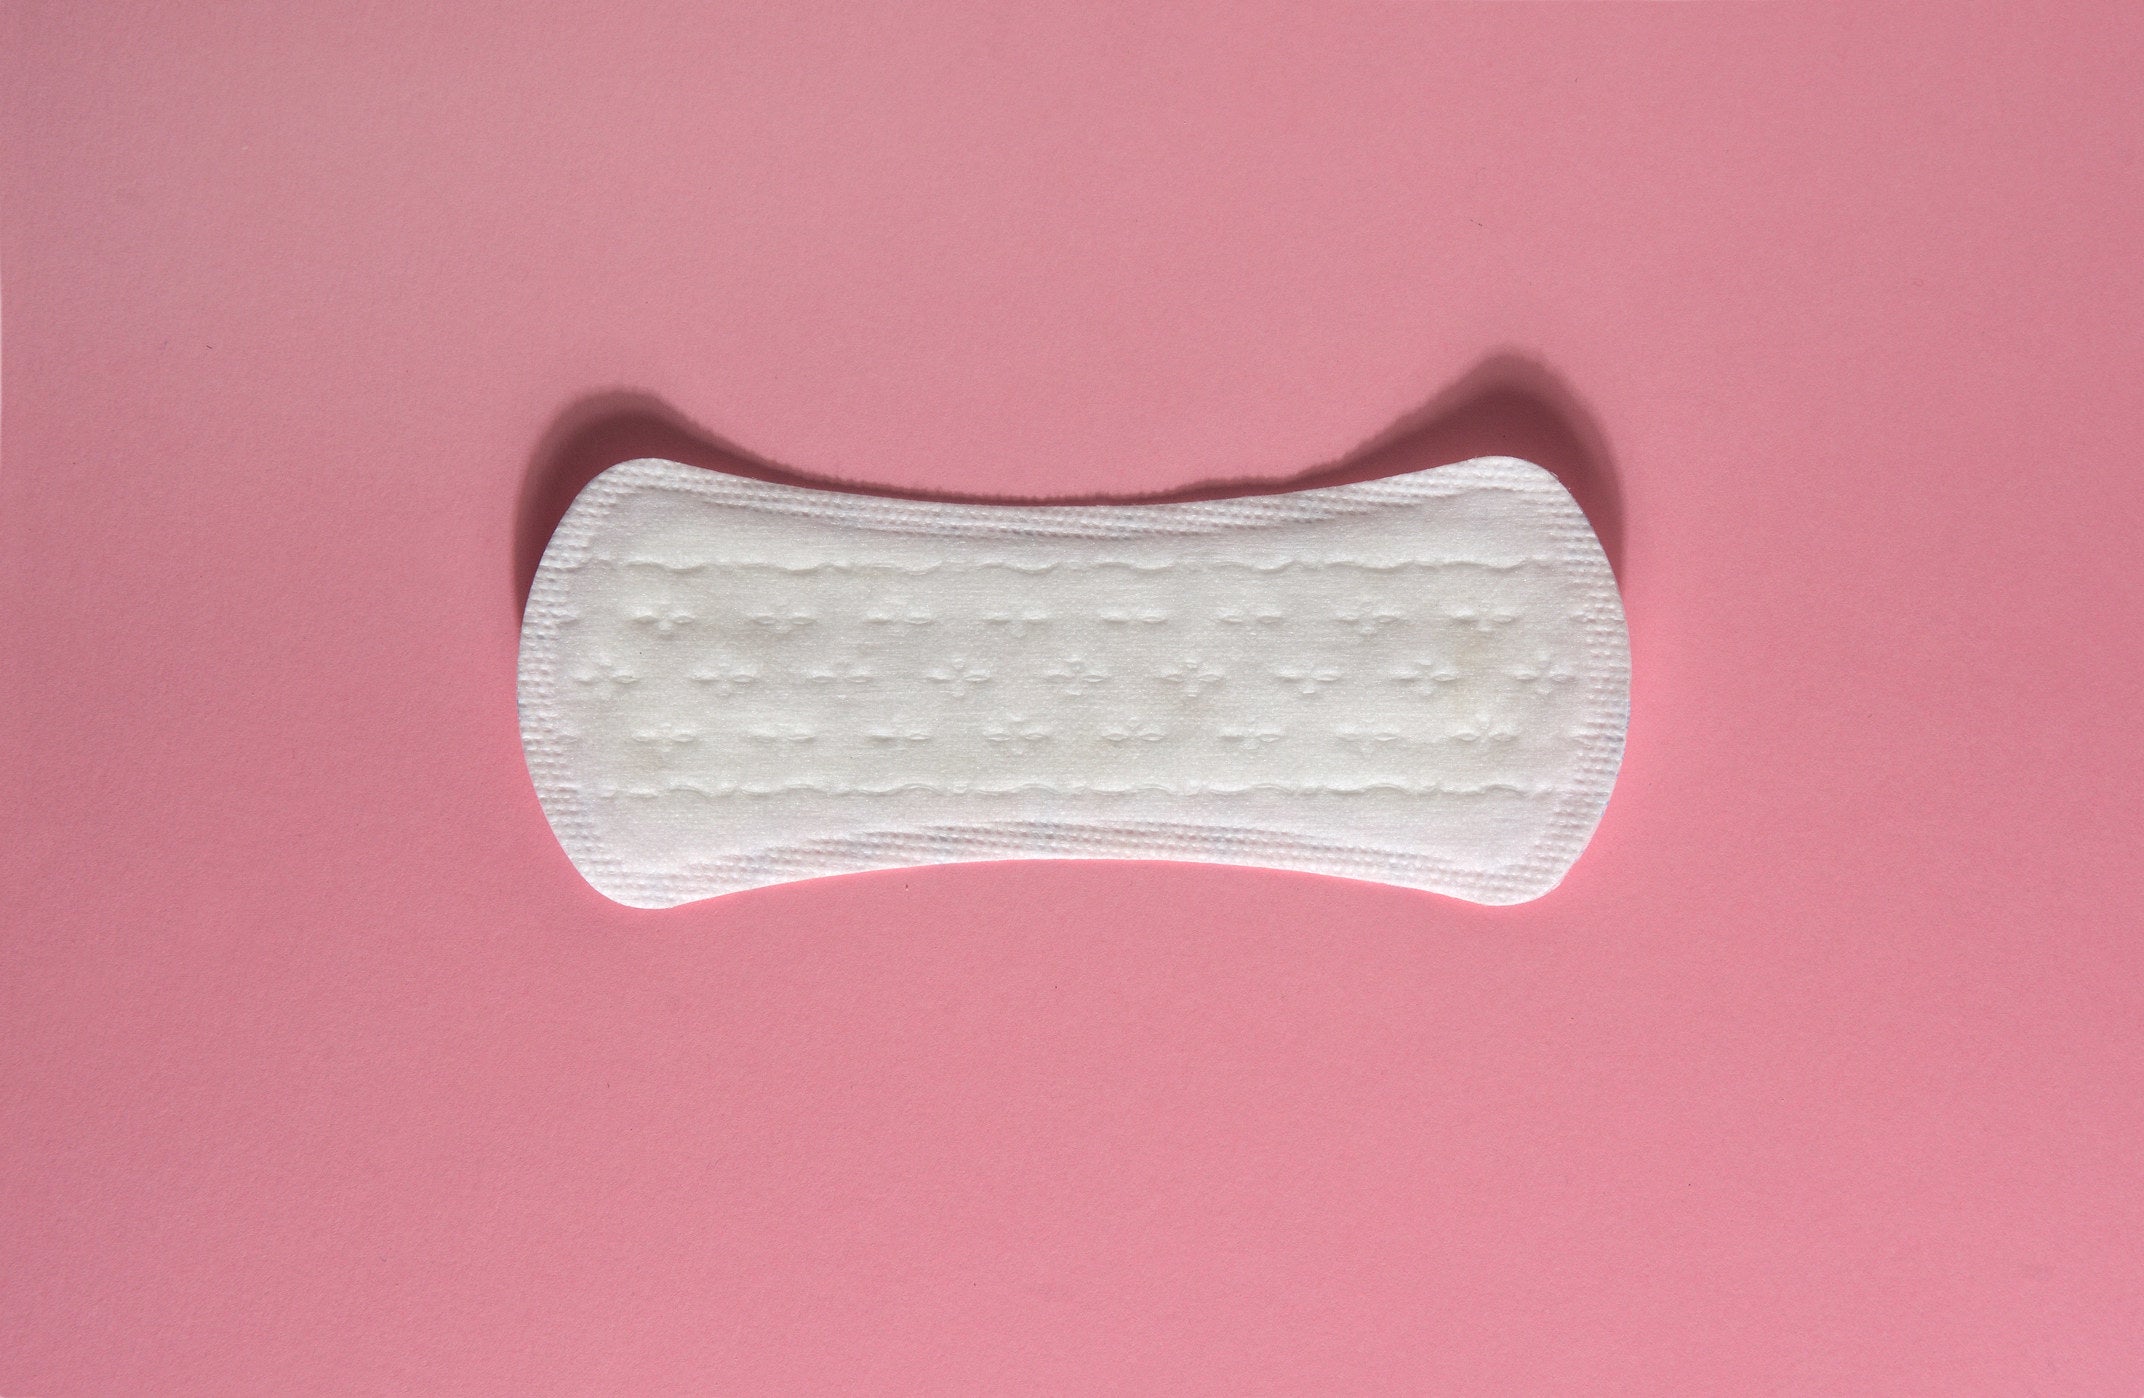 This Guy Thought Period Pads Stuck To Women Like Band-Aids And Cannot